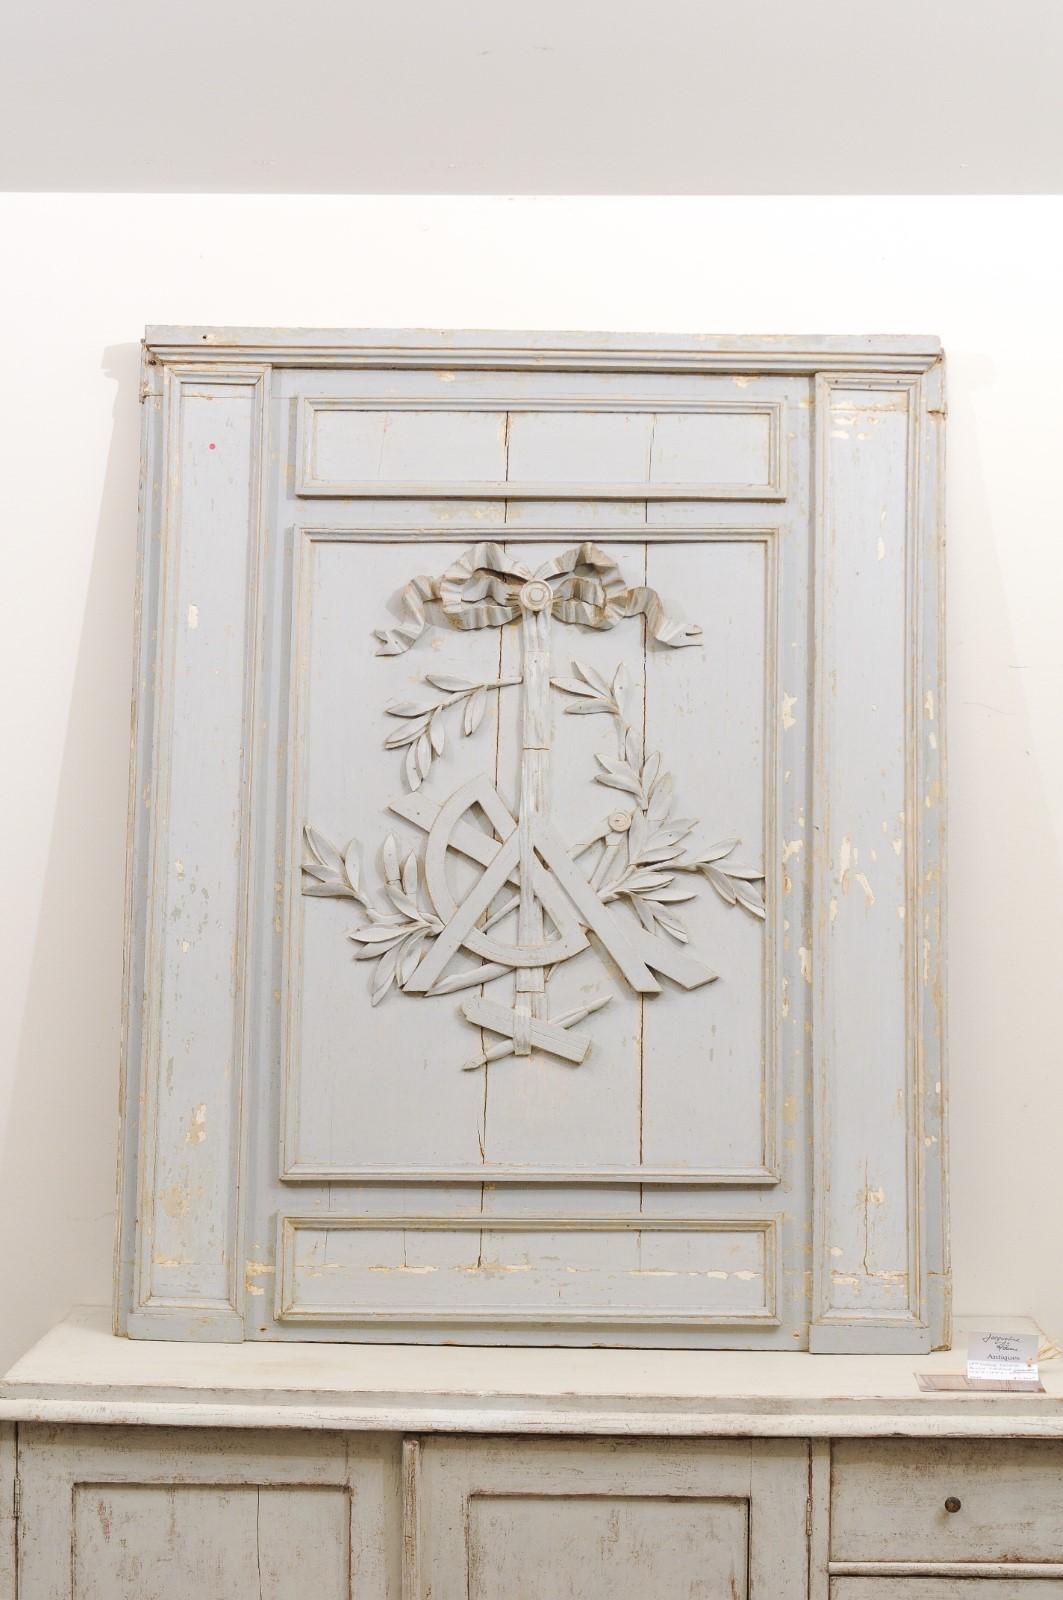 A French Louis XV period mid-18th century architectural panel from Burgundy scraped to its original paint, with ribbon-tied science trophy. Born in Burgundy during the later years of the reign of king Louis XV, this French architectural panel